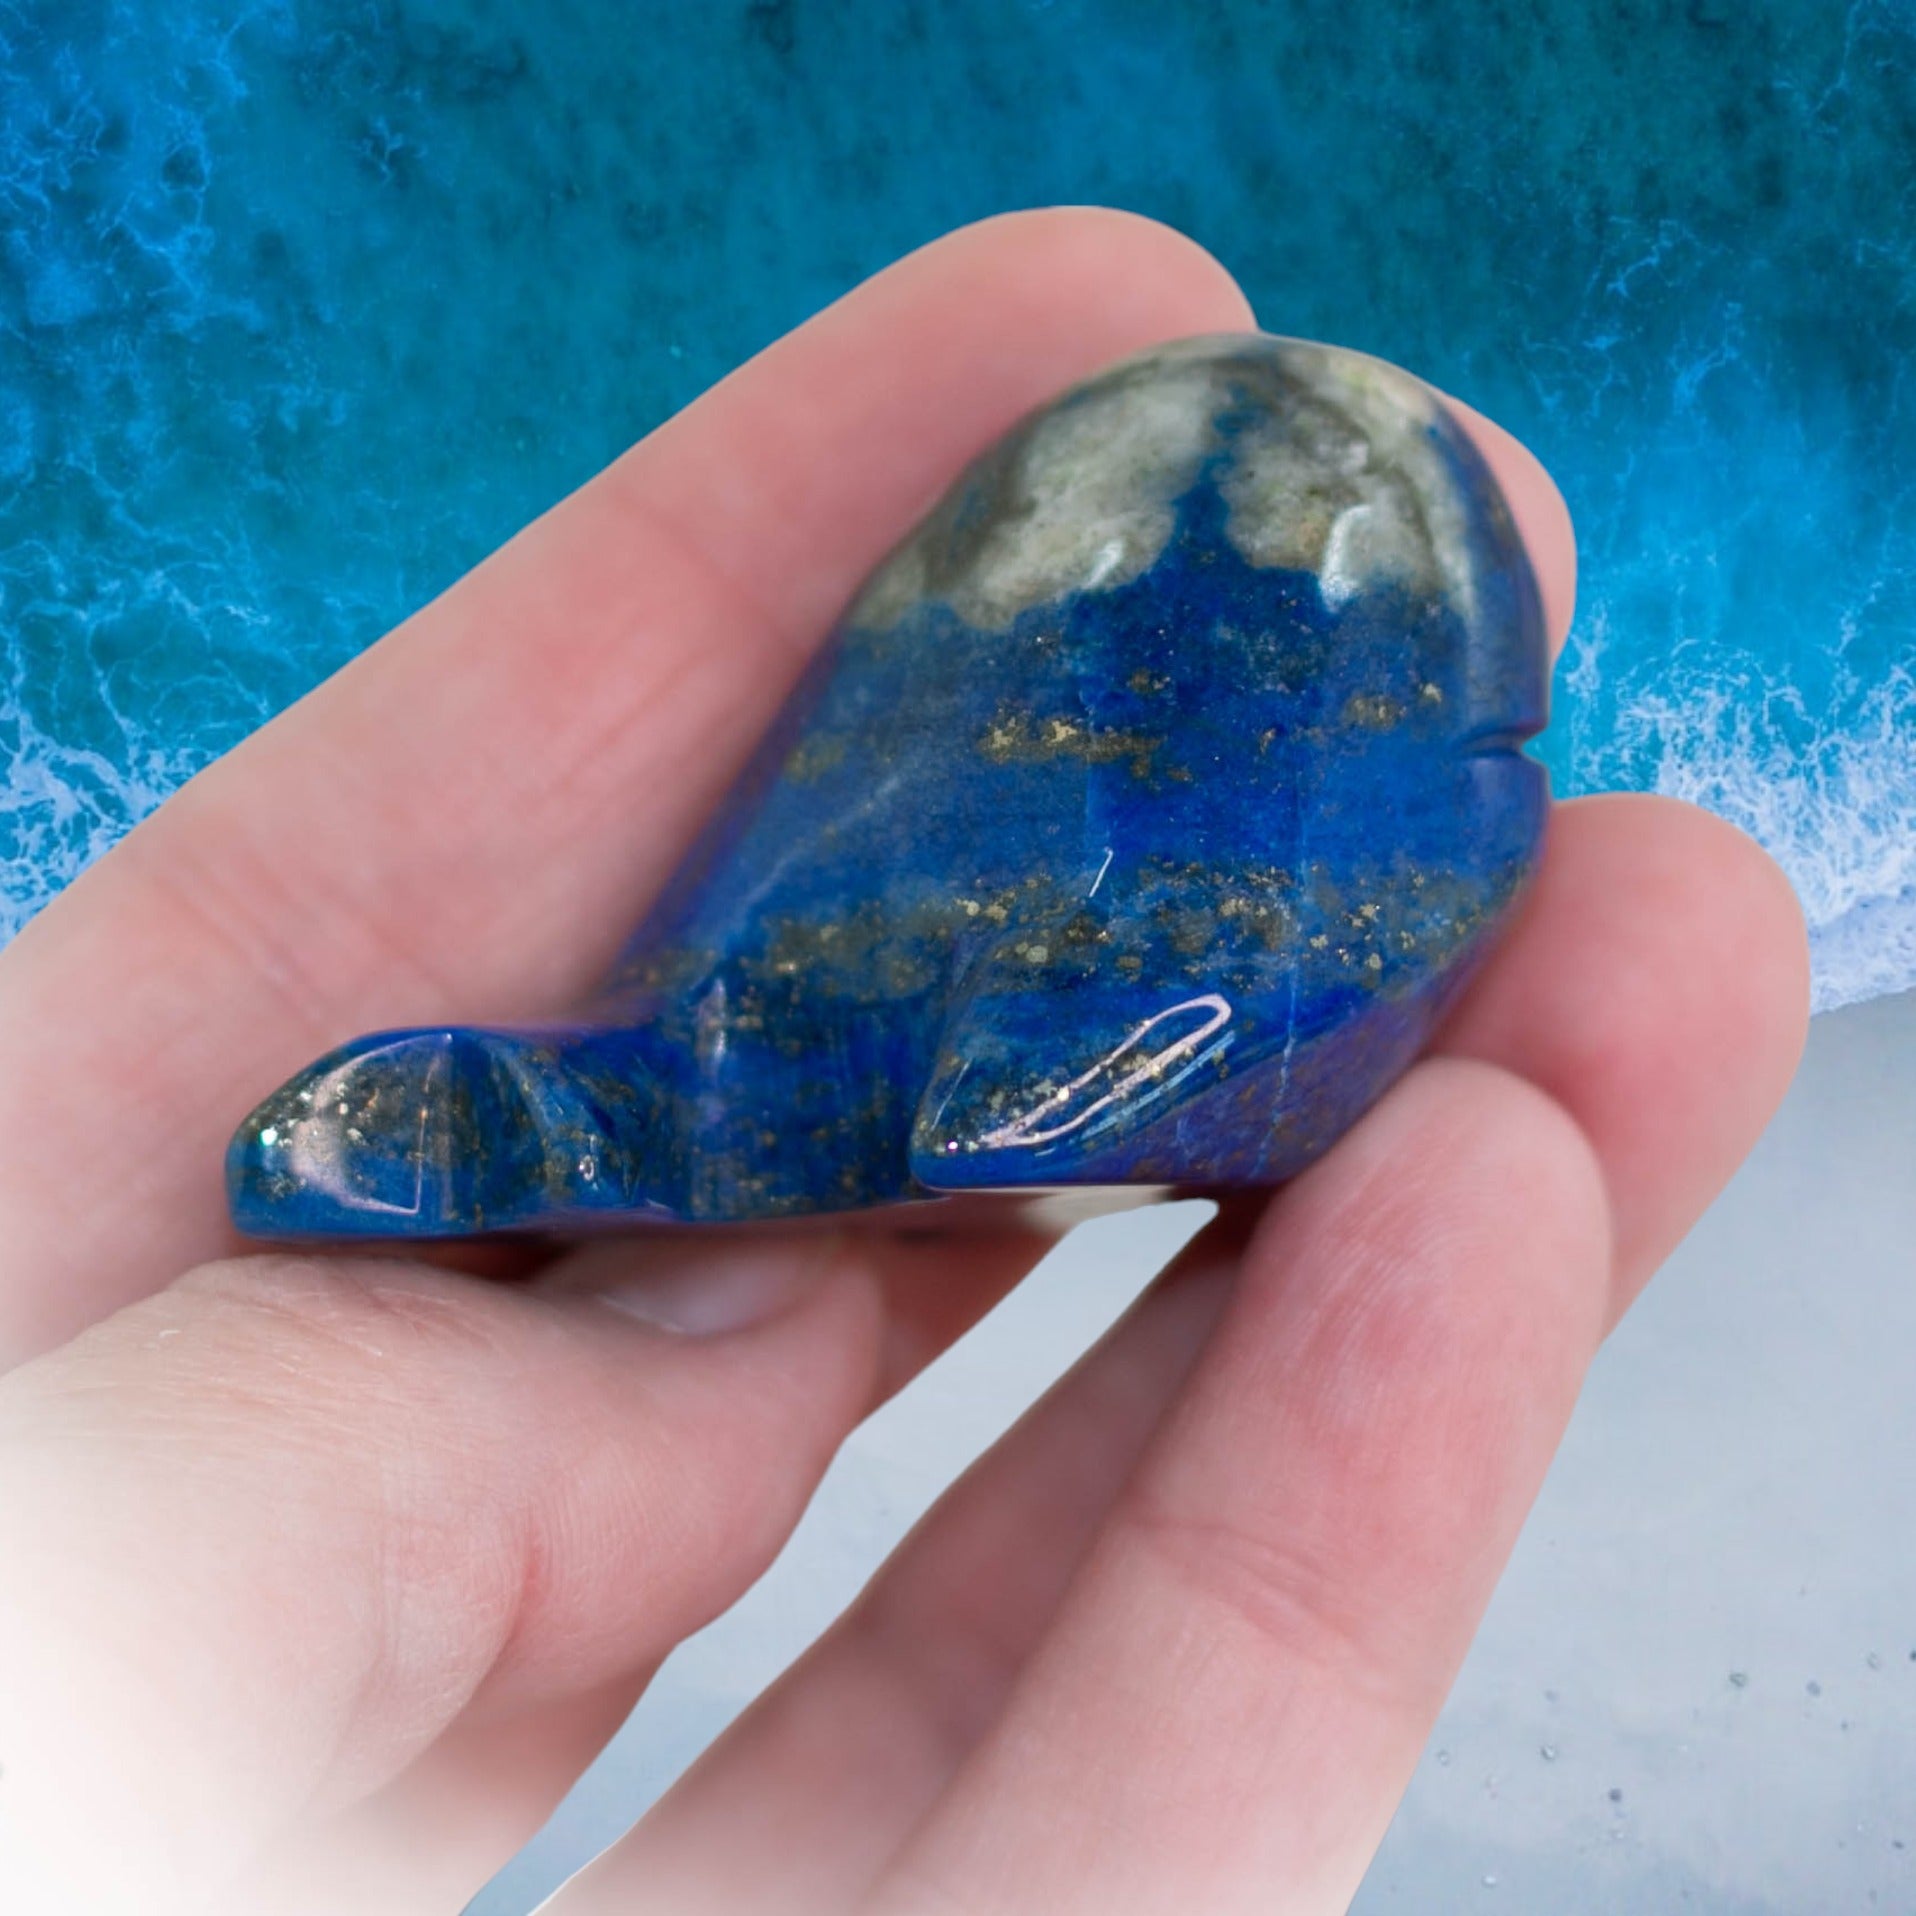 Lapis Lazuli Fairtrade Carved Baby Whale